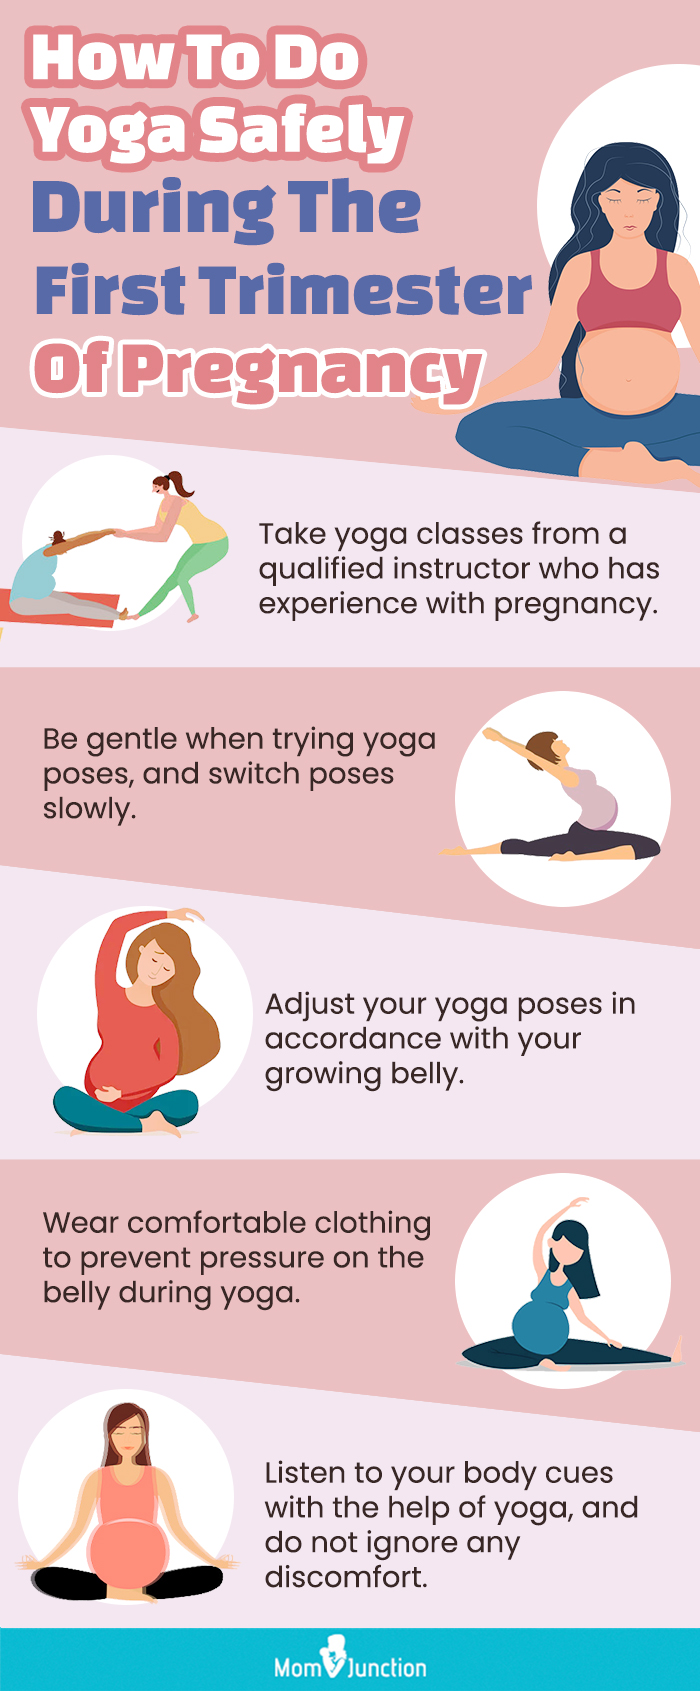 6 Best First Trimester Yoga Poses And Precautions To Take